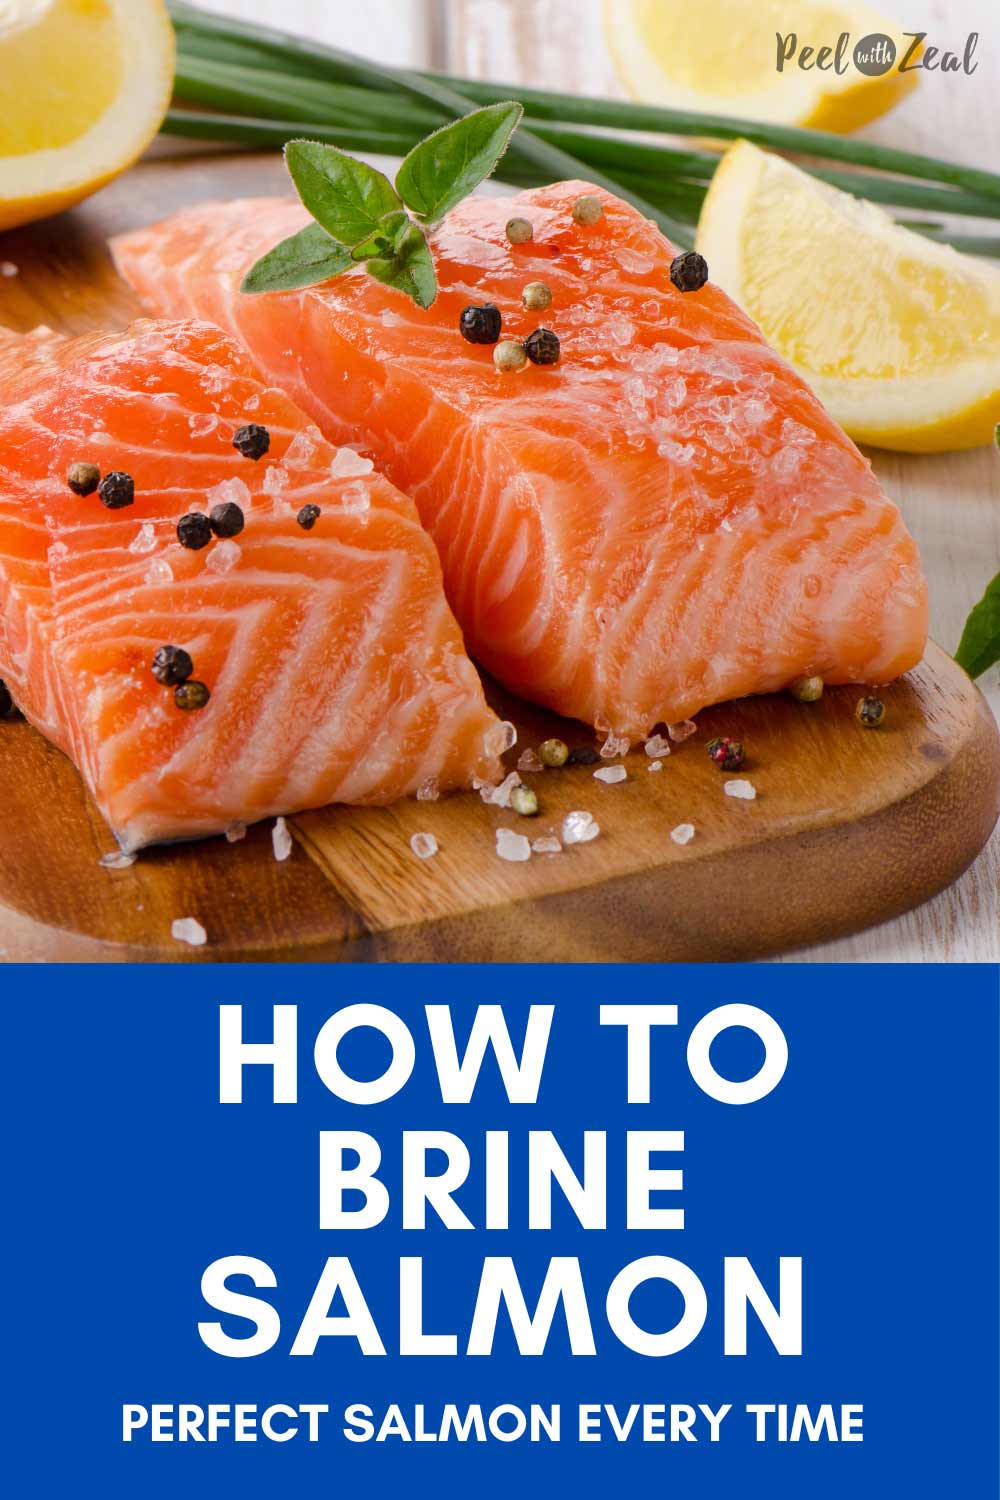 How to Brine Salmon - Peel with Zeal